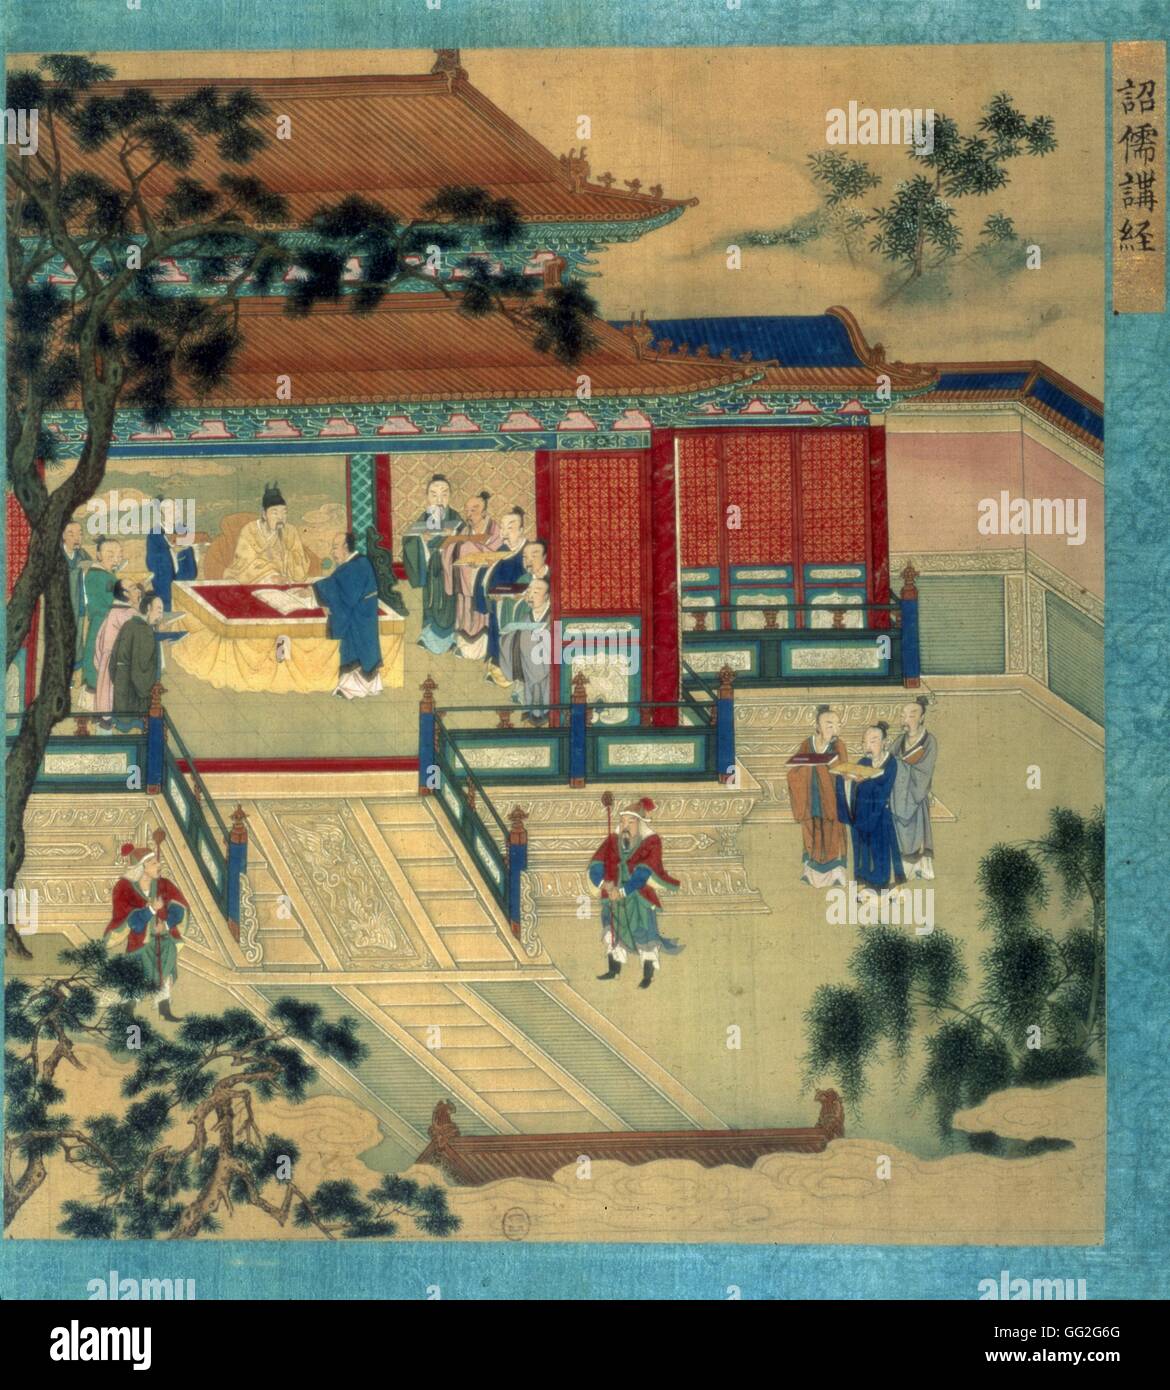 Anonymous Chinese school The Emperor of the Han dynasty with scholars translating classical texts.  From 'The History of the Chinese Emperors' 18th century Painting on silk Paris, Bibliothèque Nationale de France Stock Photo